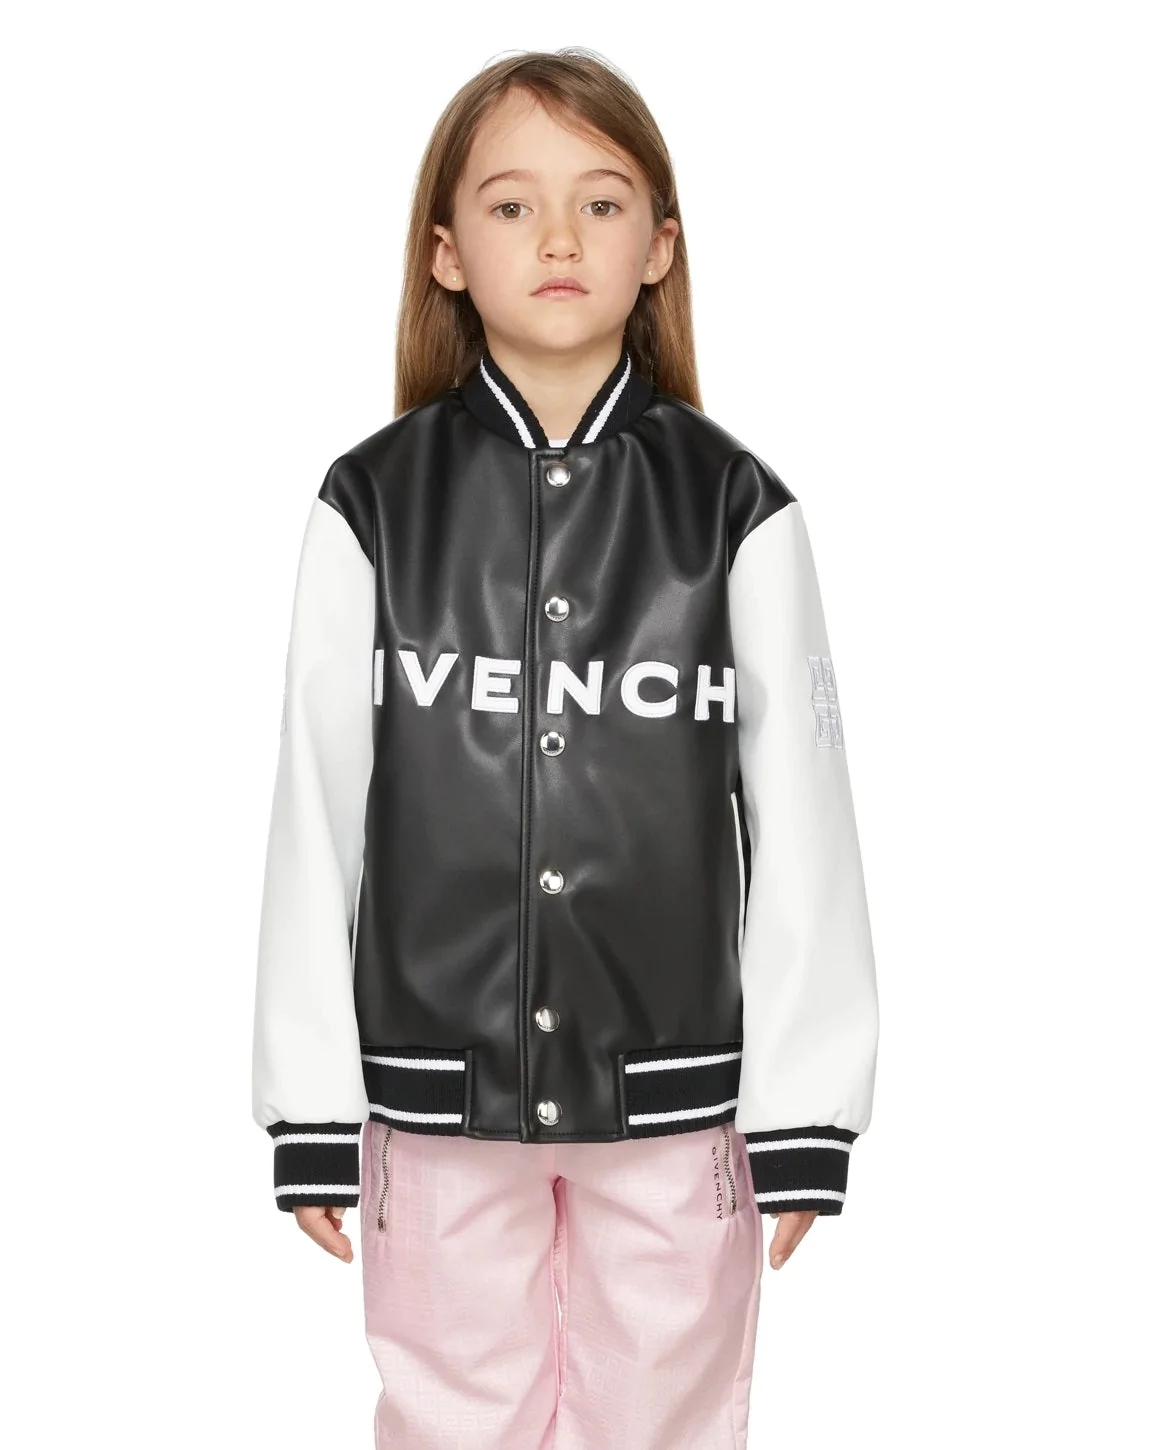 Givenchy Kids Logo-Embroidered Faux-Leather Bomber Jacket